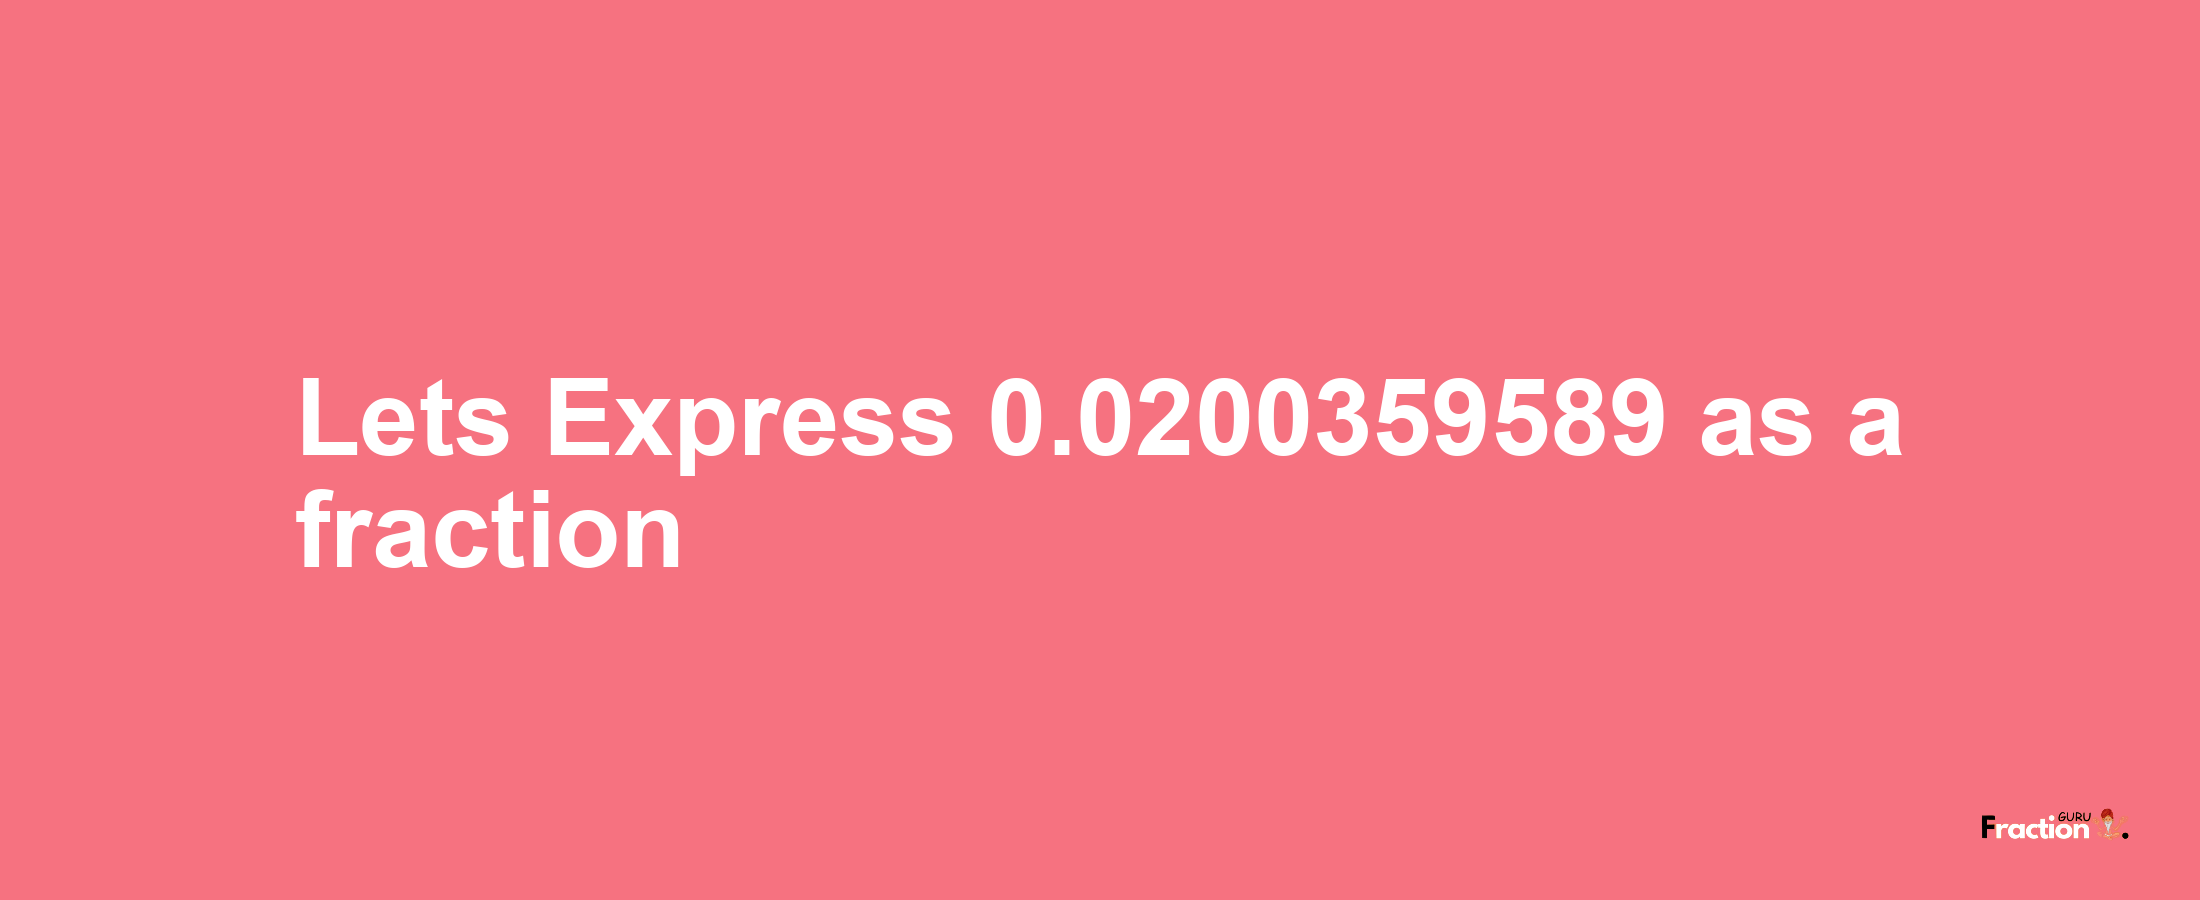 Lets Express 0.0200359589 as afraction